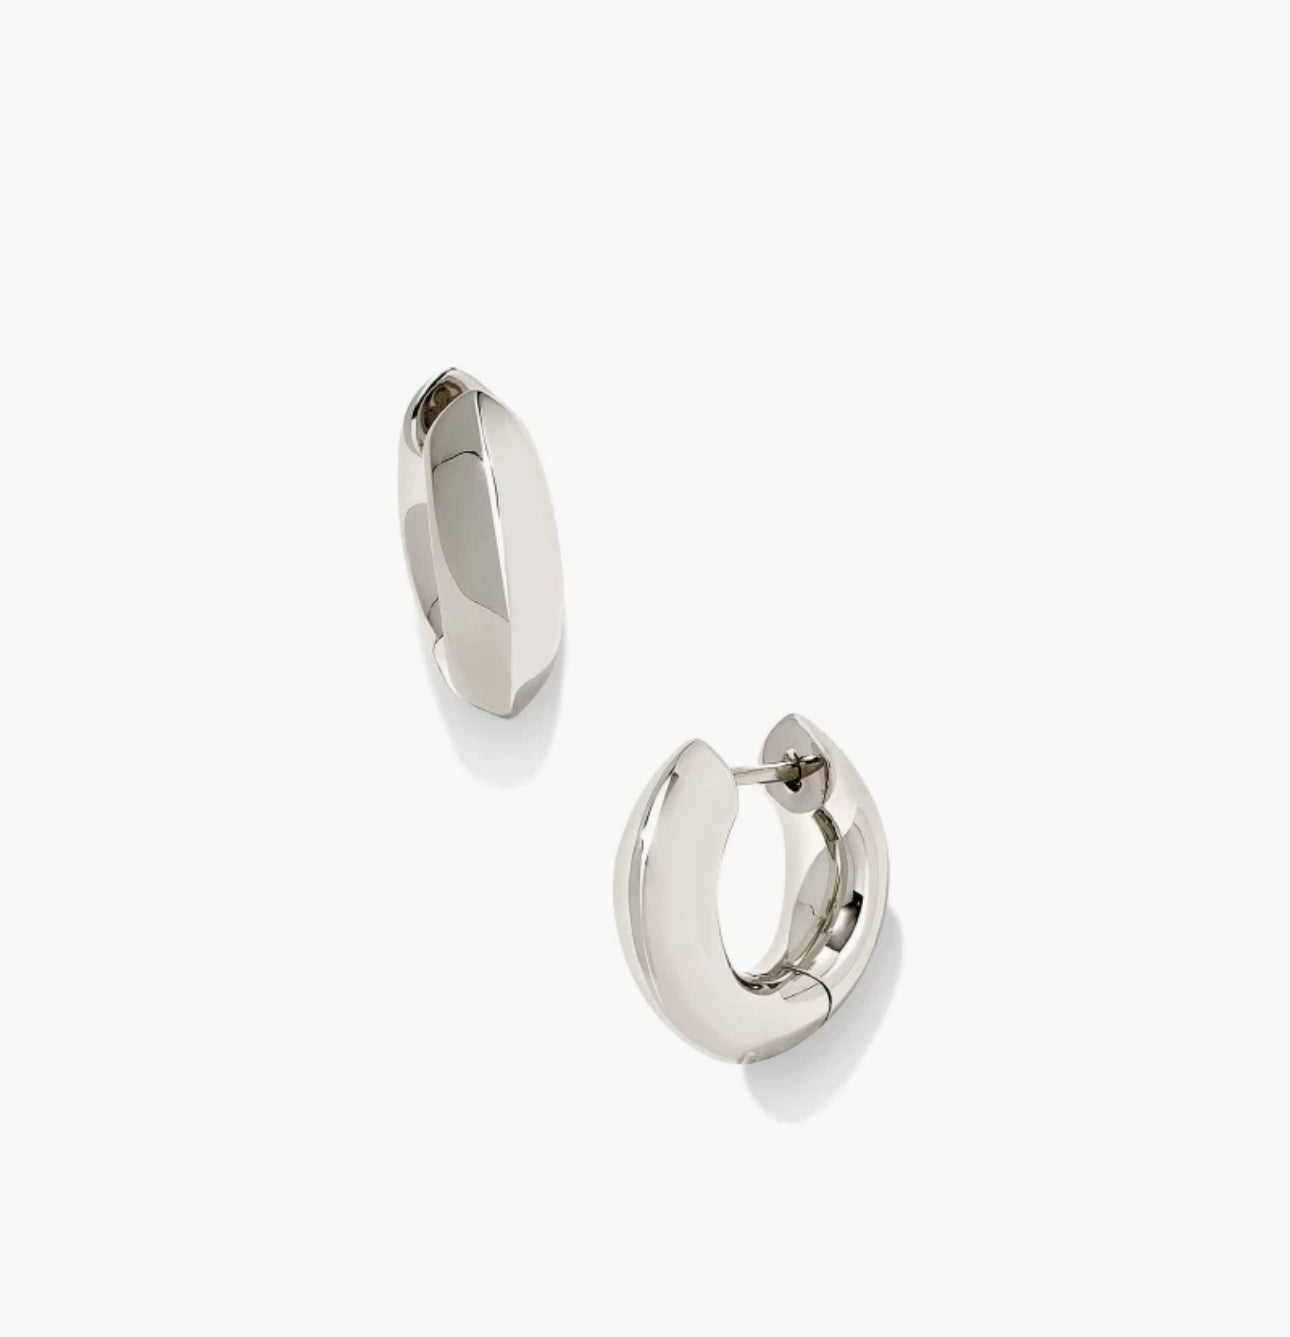 Kendra Scott Mikki Metal Hoop-Earrings-Kendra Scott-Market Street Nest, Fashionable Clothing, Shoes and Home Décor Located in Mabank, TX